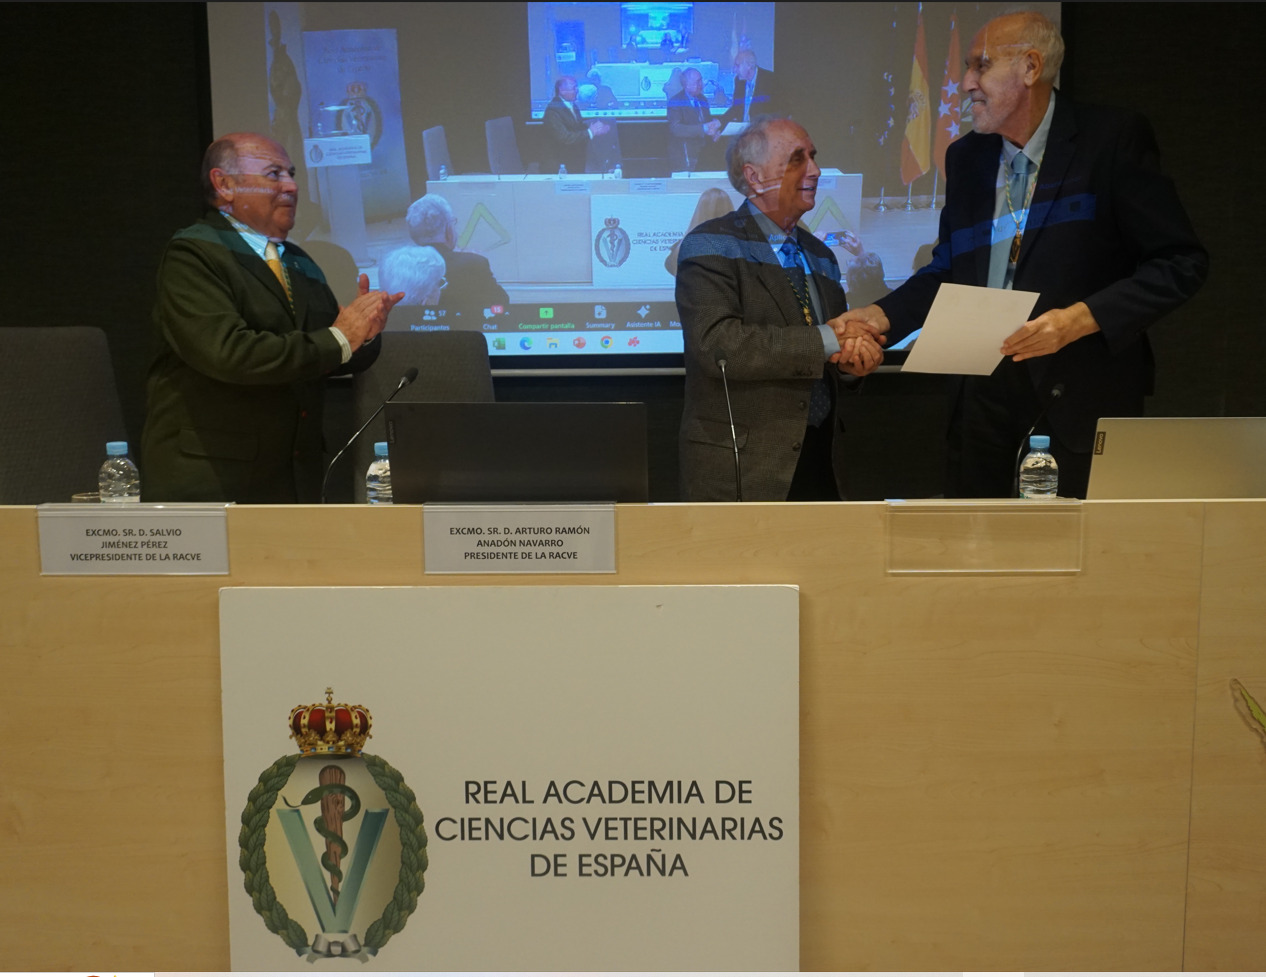 the president awarded Dr Borrell Valls a diploma for his participation